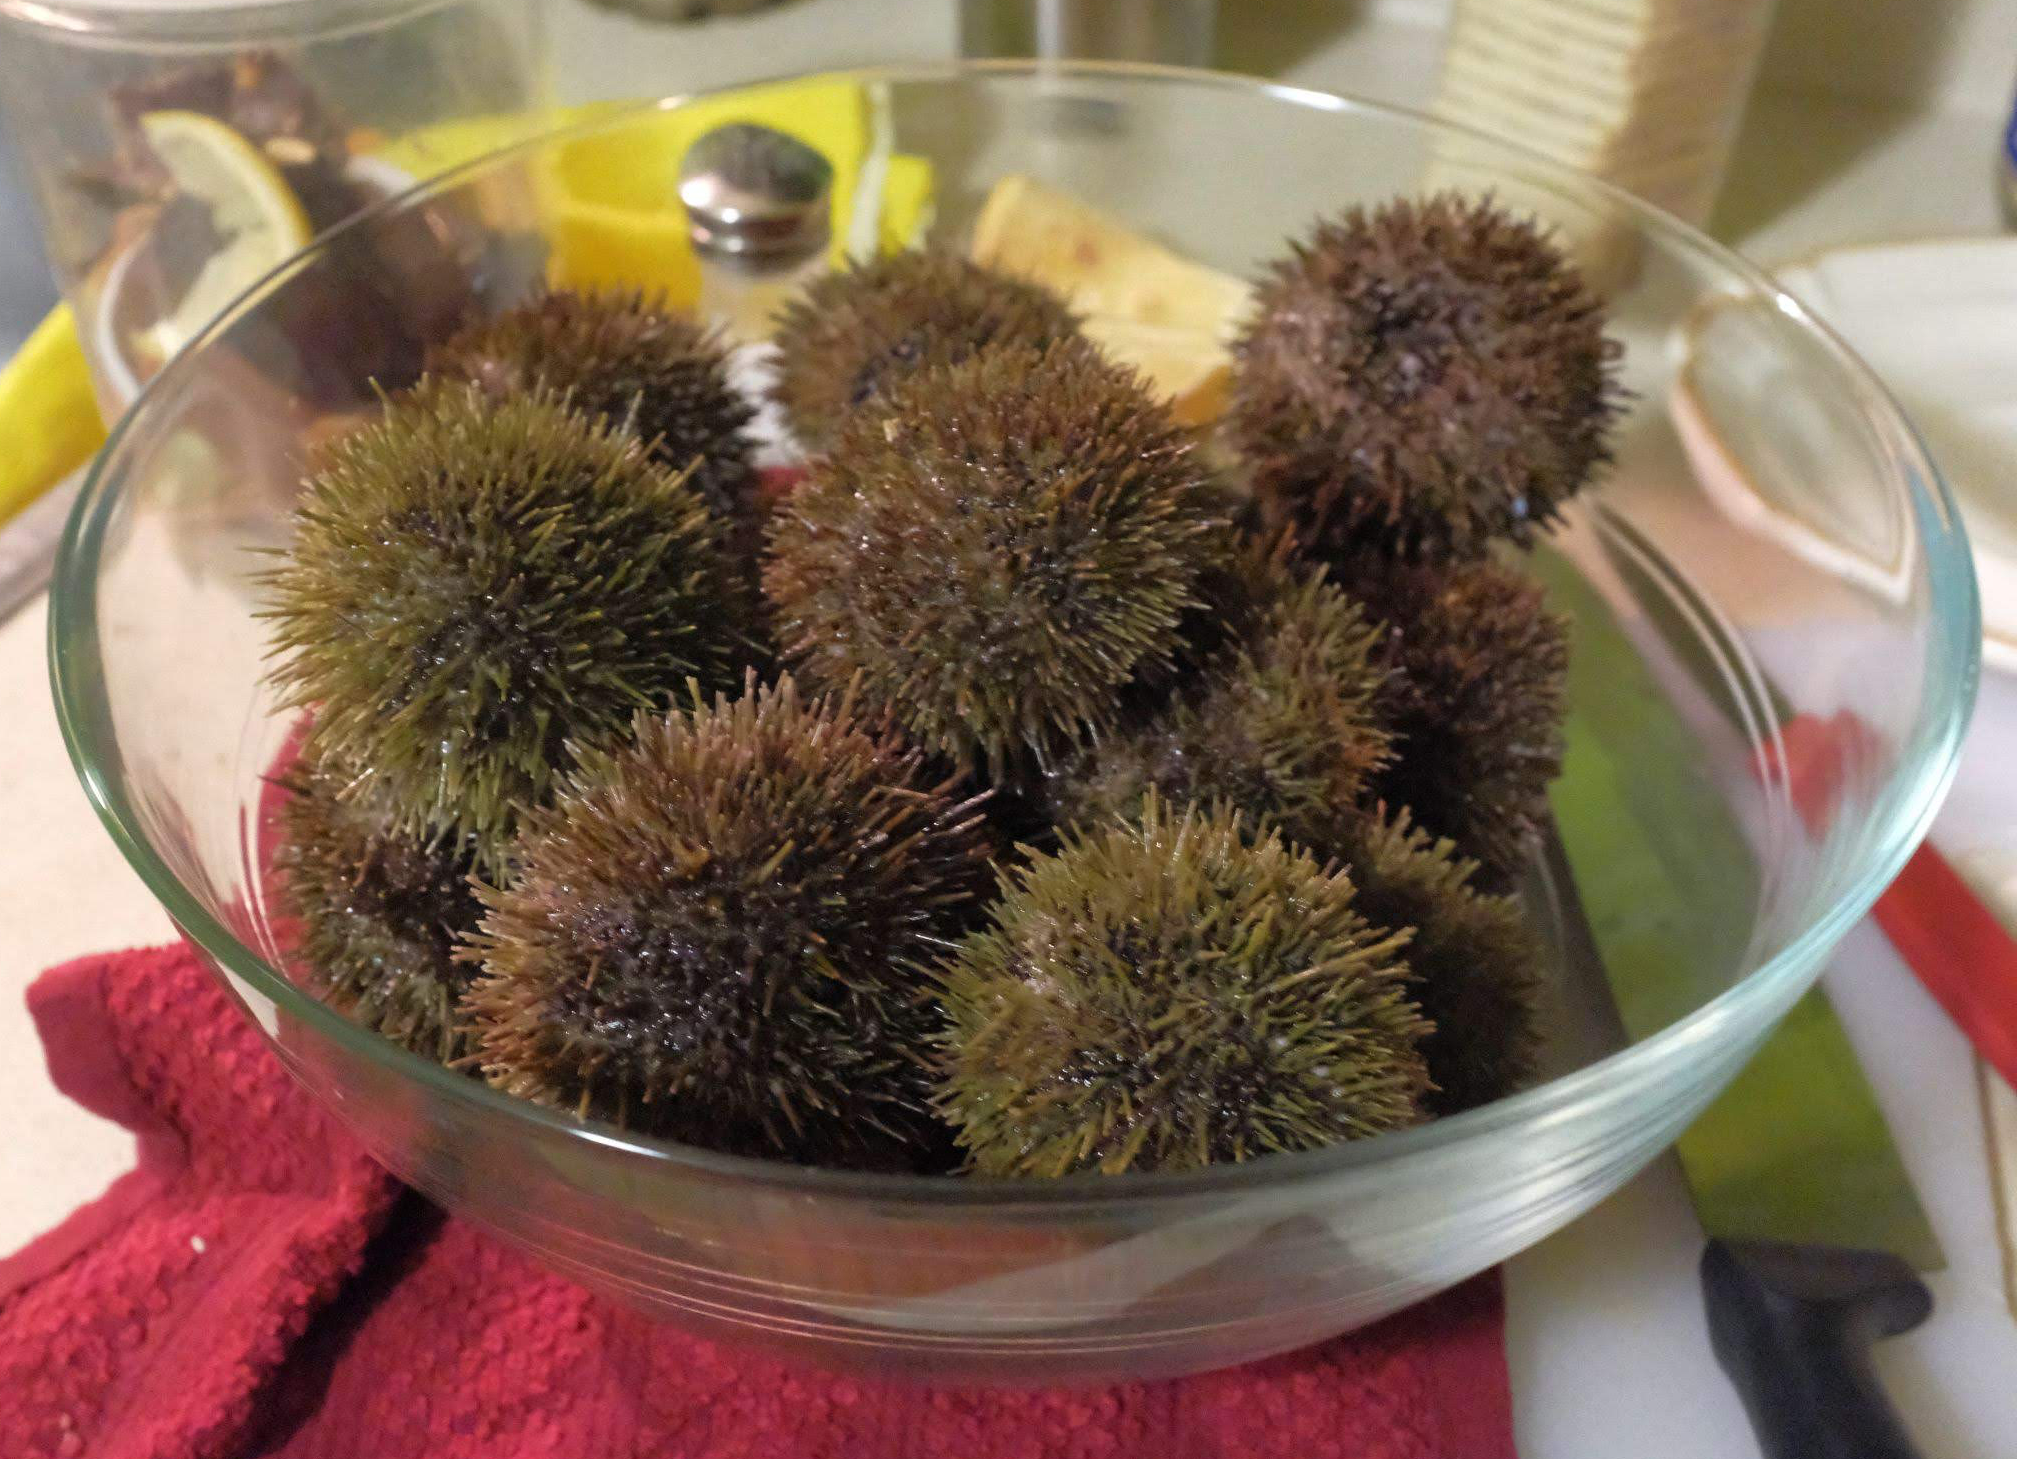 A pile of sea urchins in a glass bowl